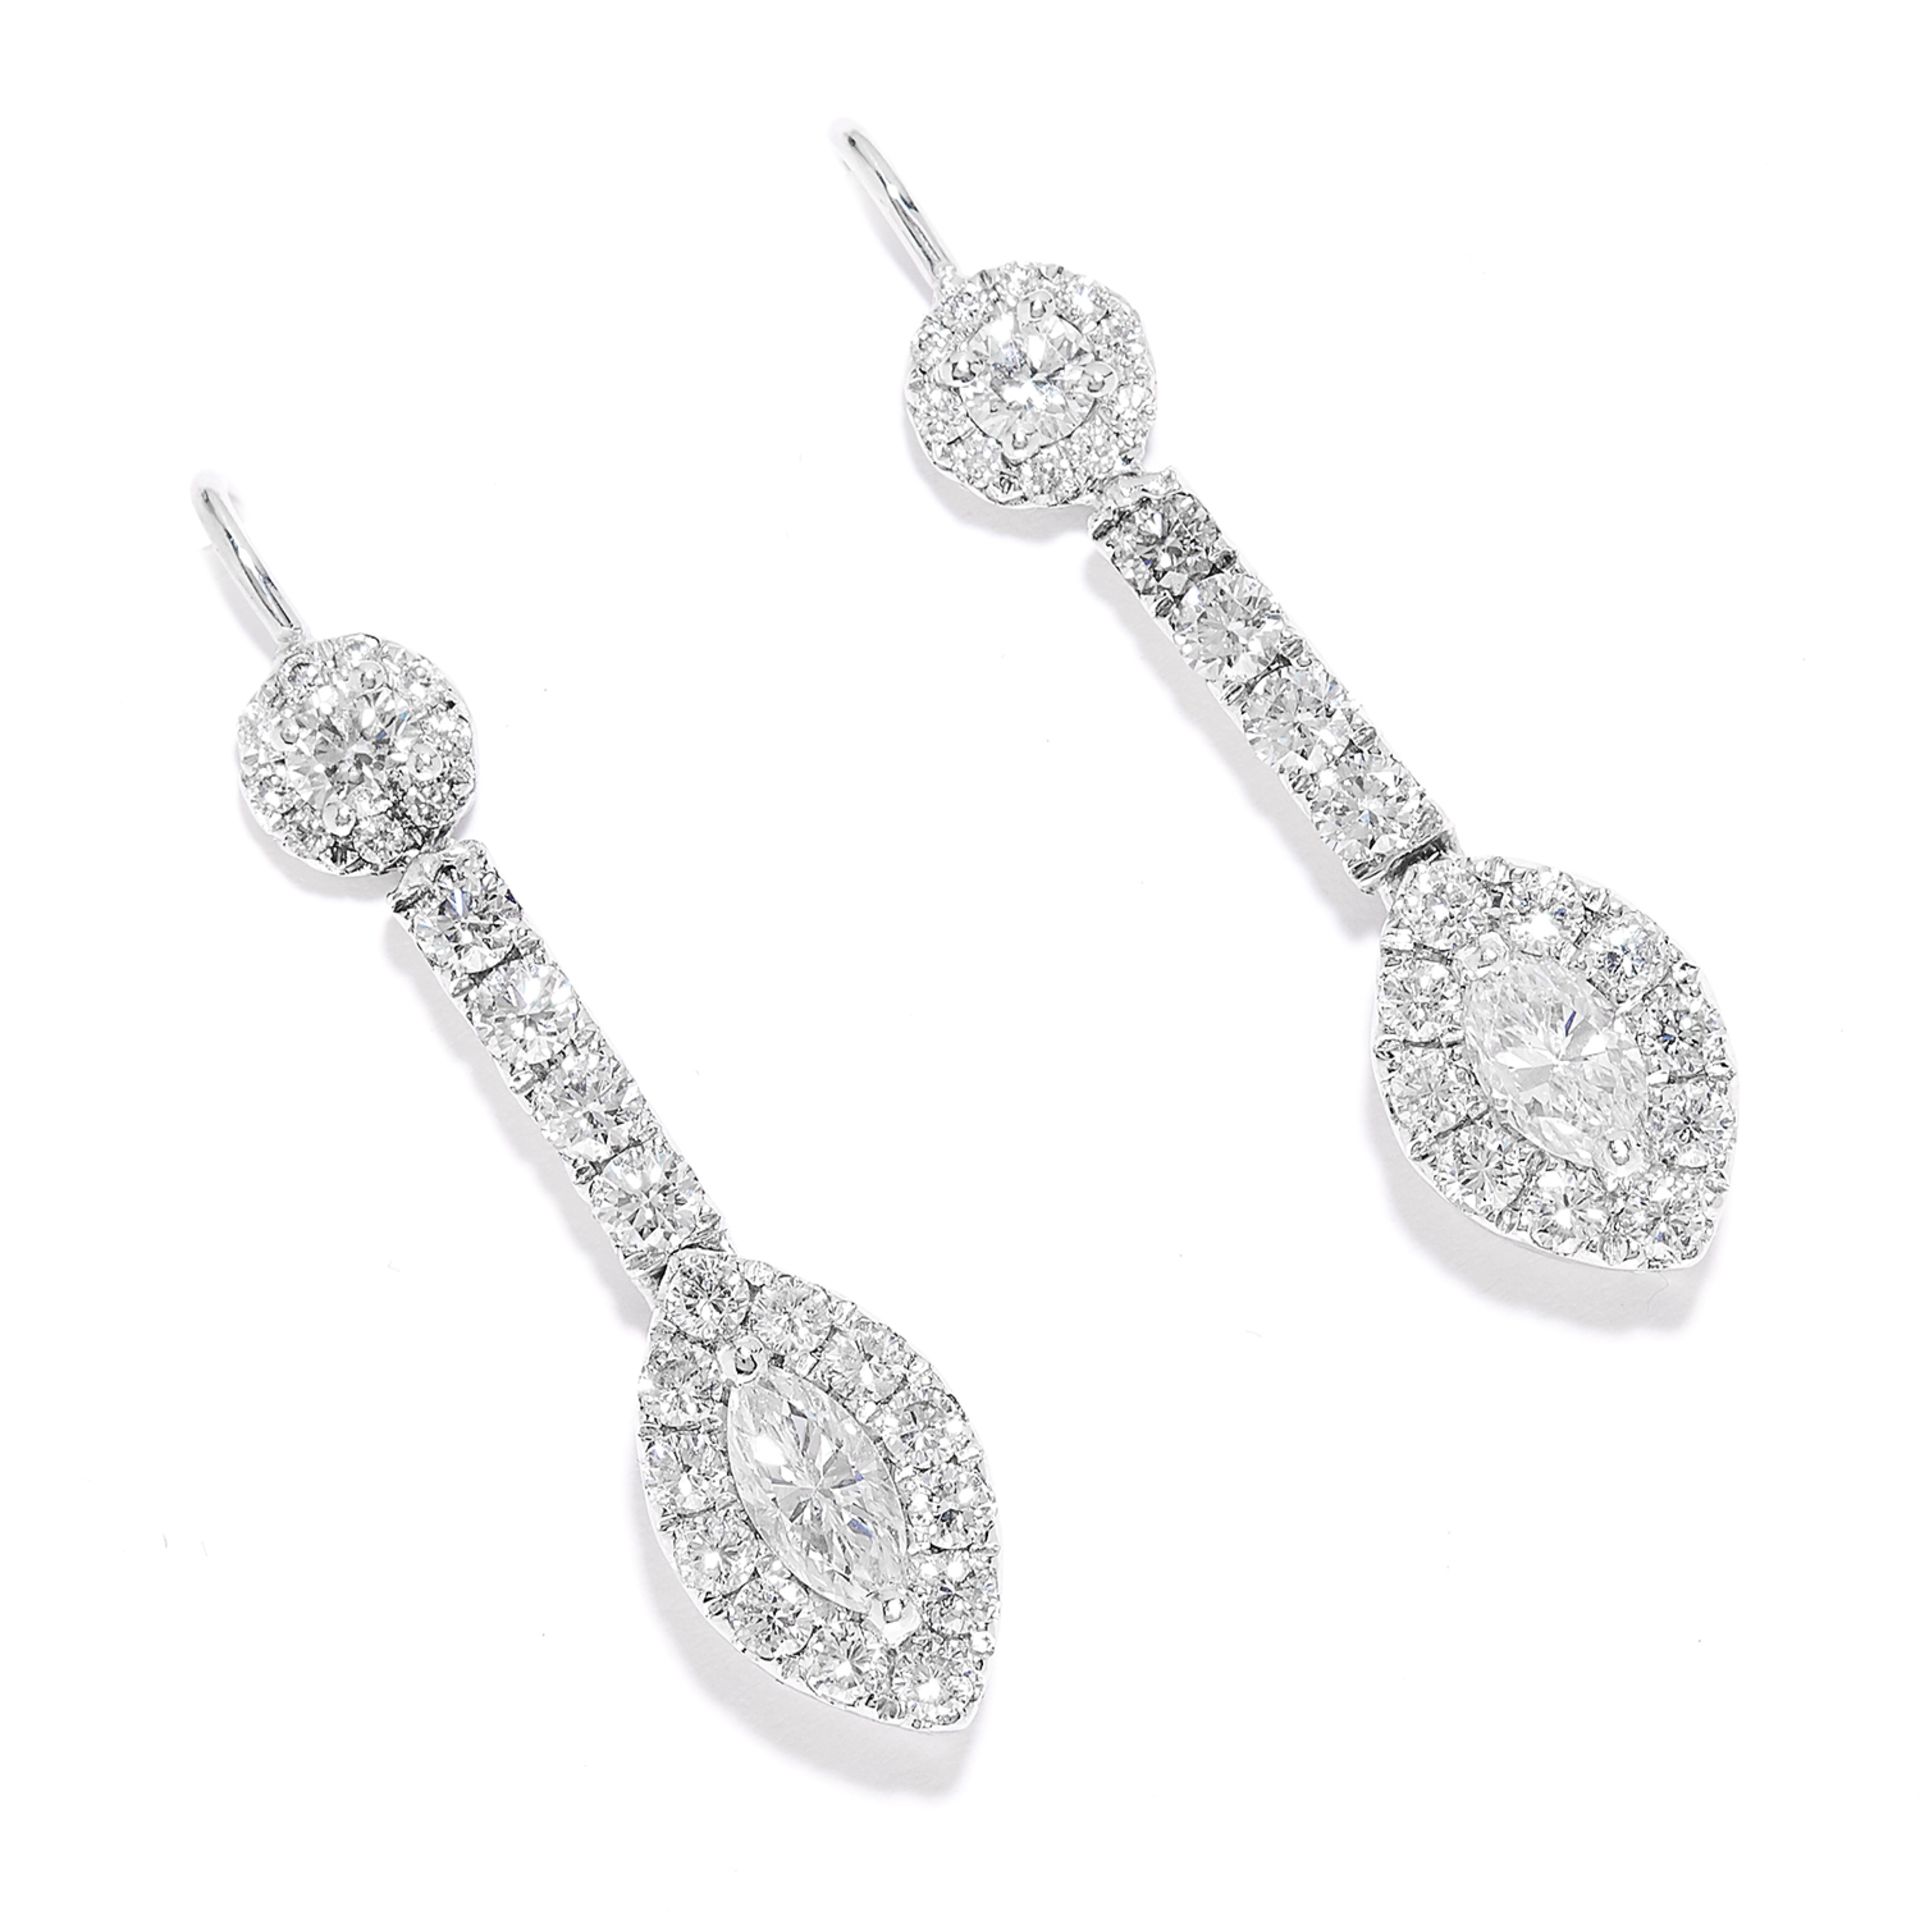 1.70 CARAT DIAMOND EARRINGS in 18ct white gold or platinum, set with round and marquise cut diamonds